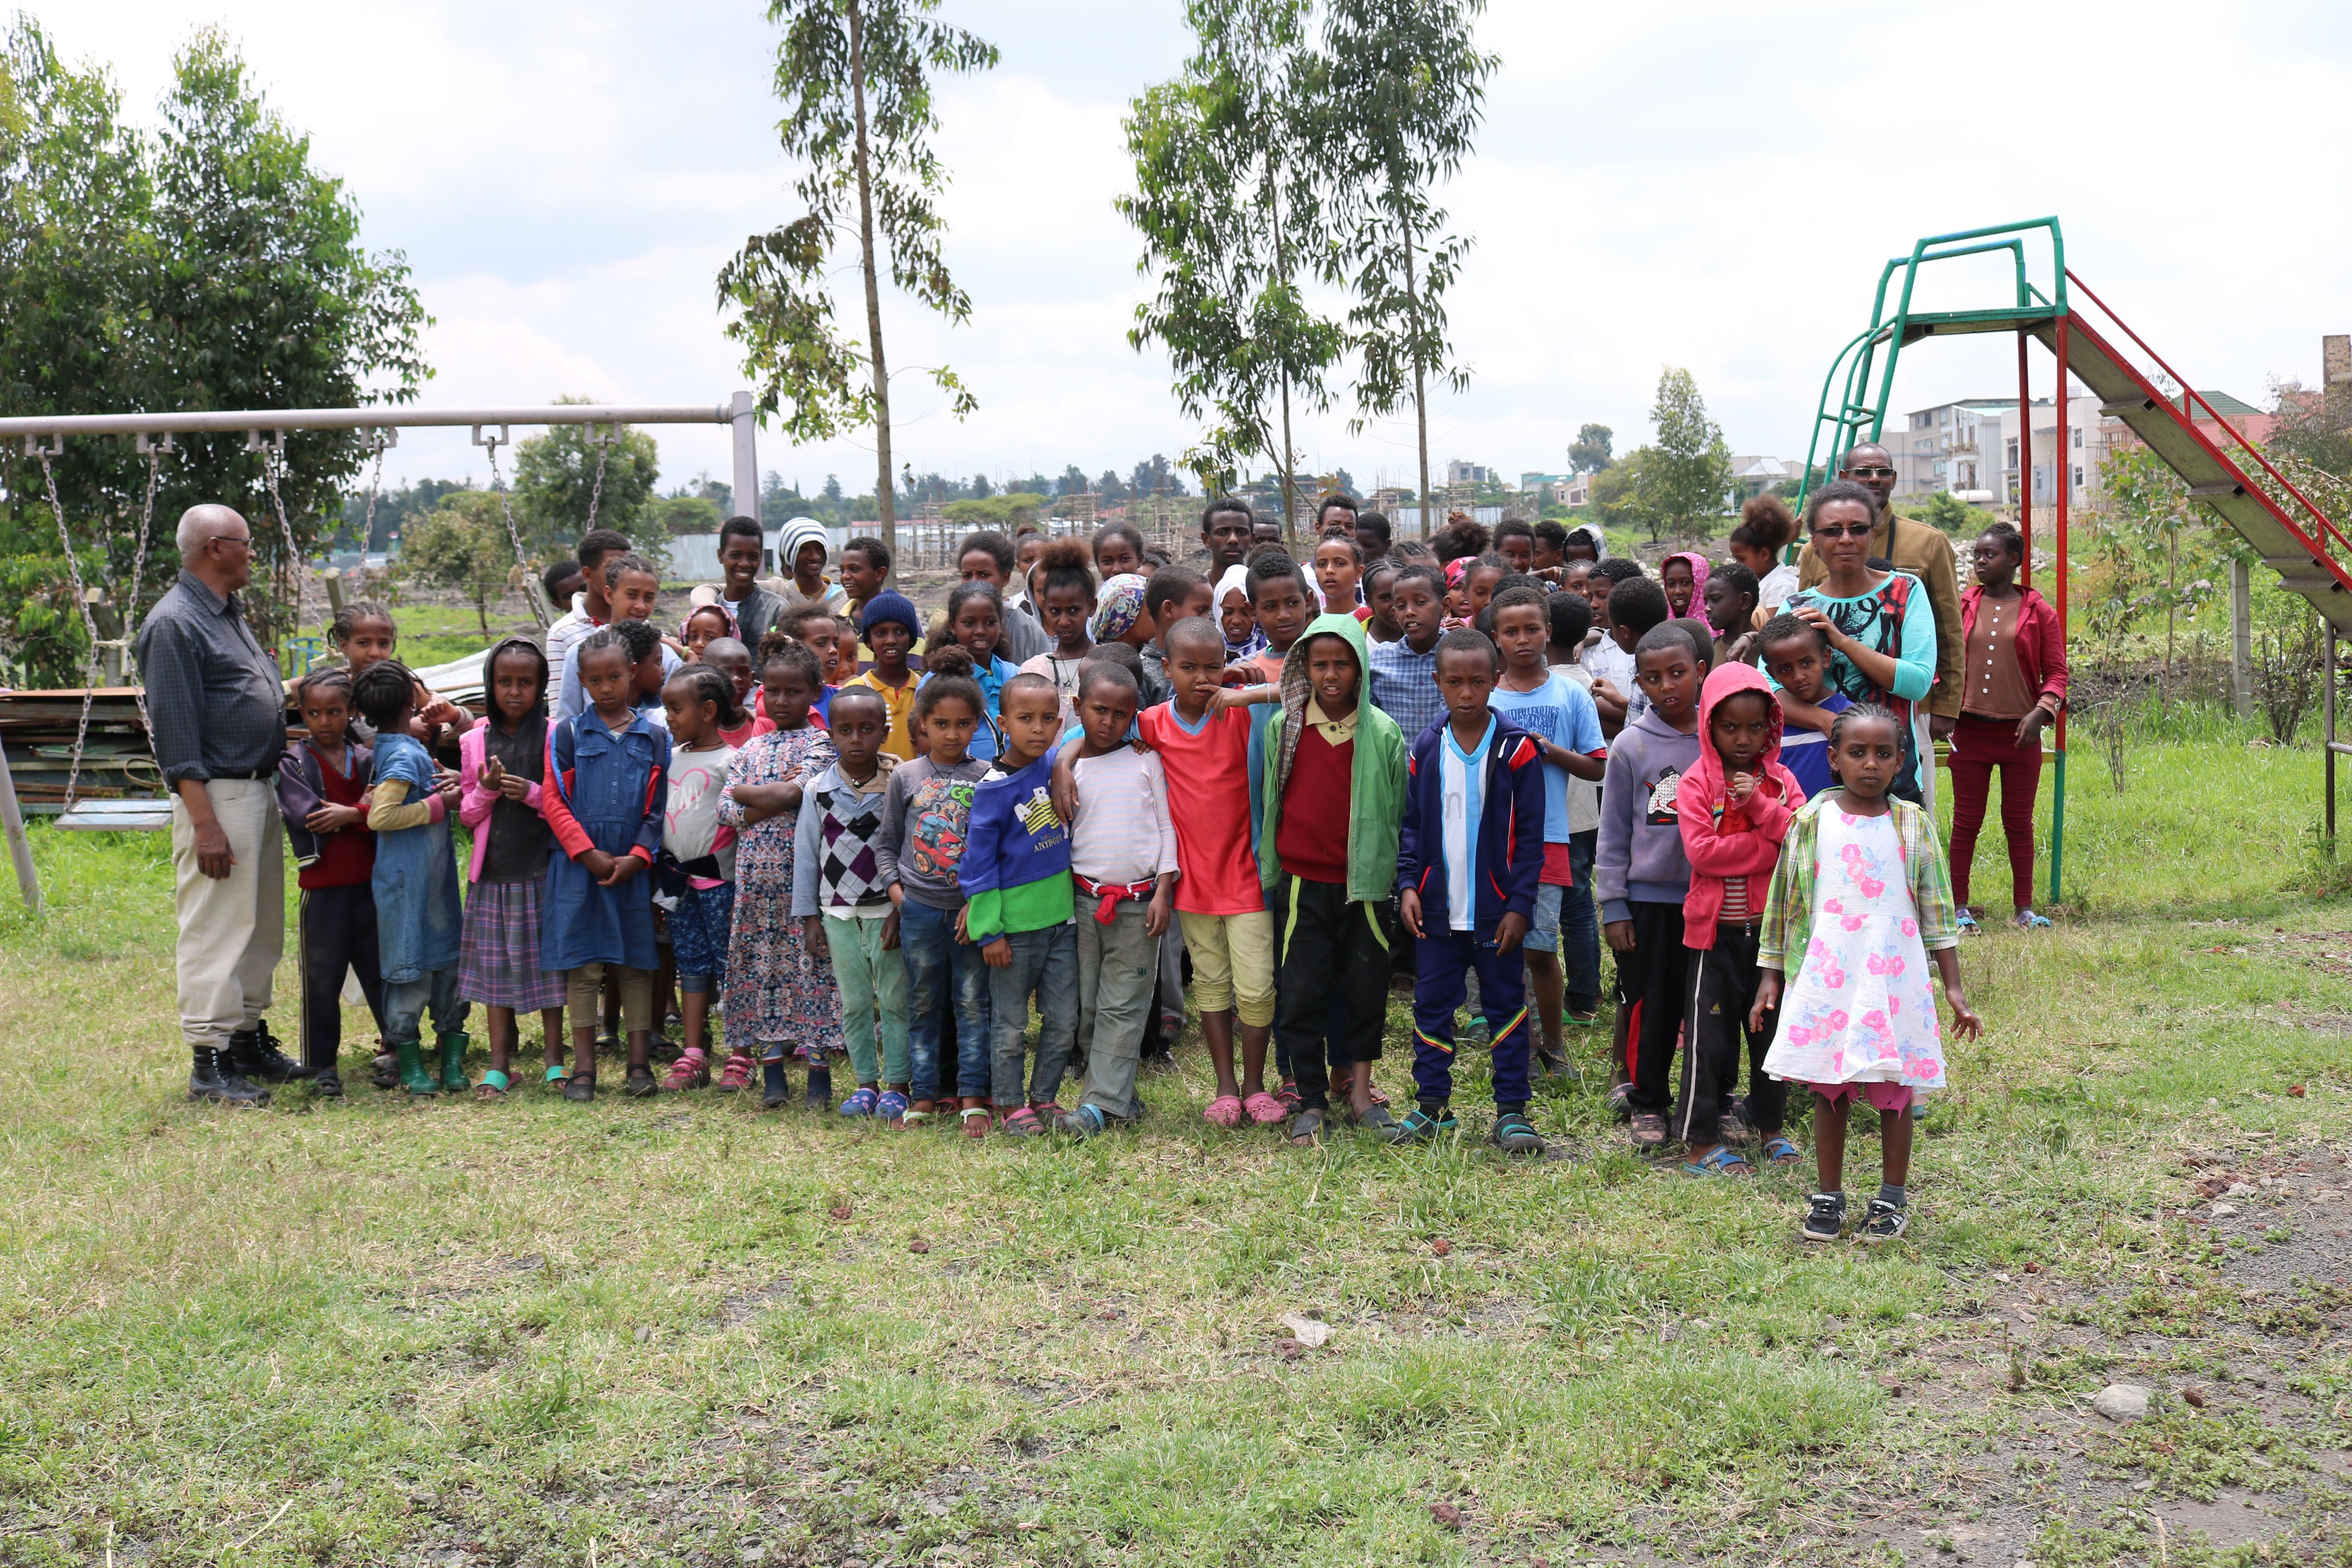 The children from Hanna Orphans Home pose for a group picture in front of their playground. These children are provided with homes that allow them to live together and build a community with one another. The orphanage helps children who lost their parents to HIV/AIDS. Image by Abigail Bekele. Ethiopia, 2018.